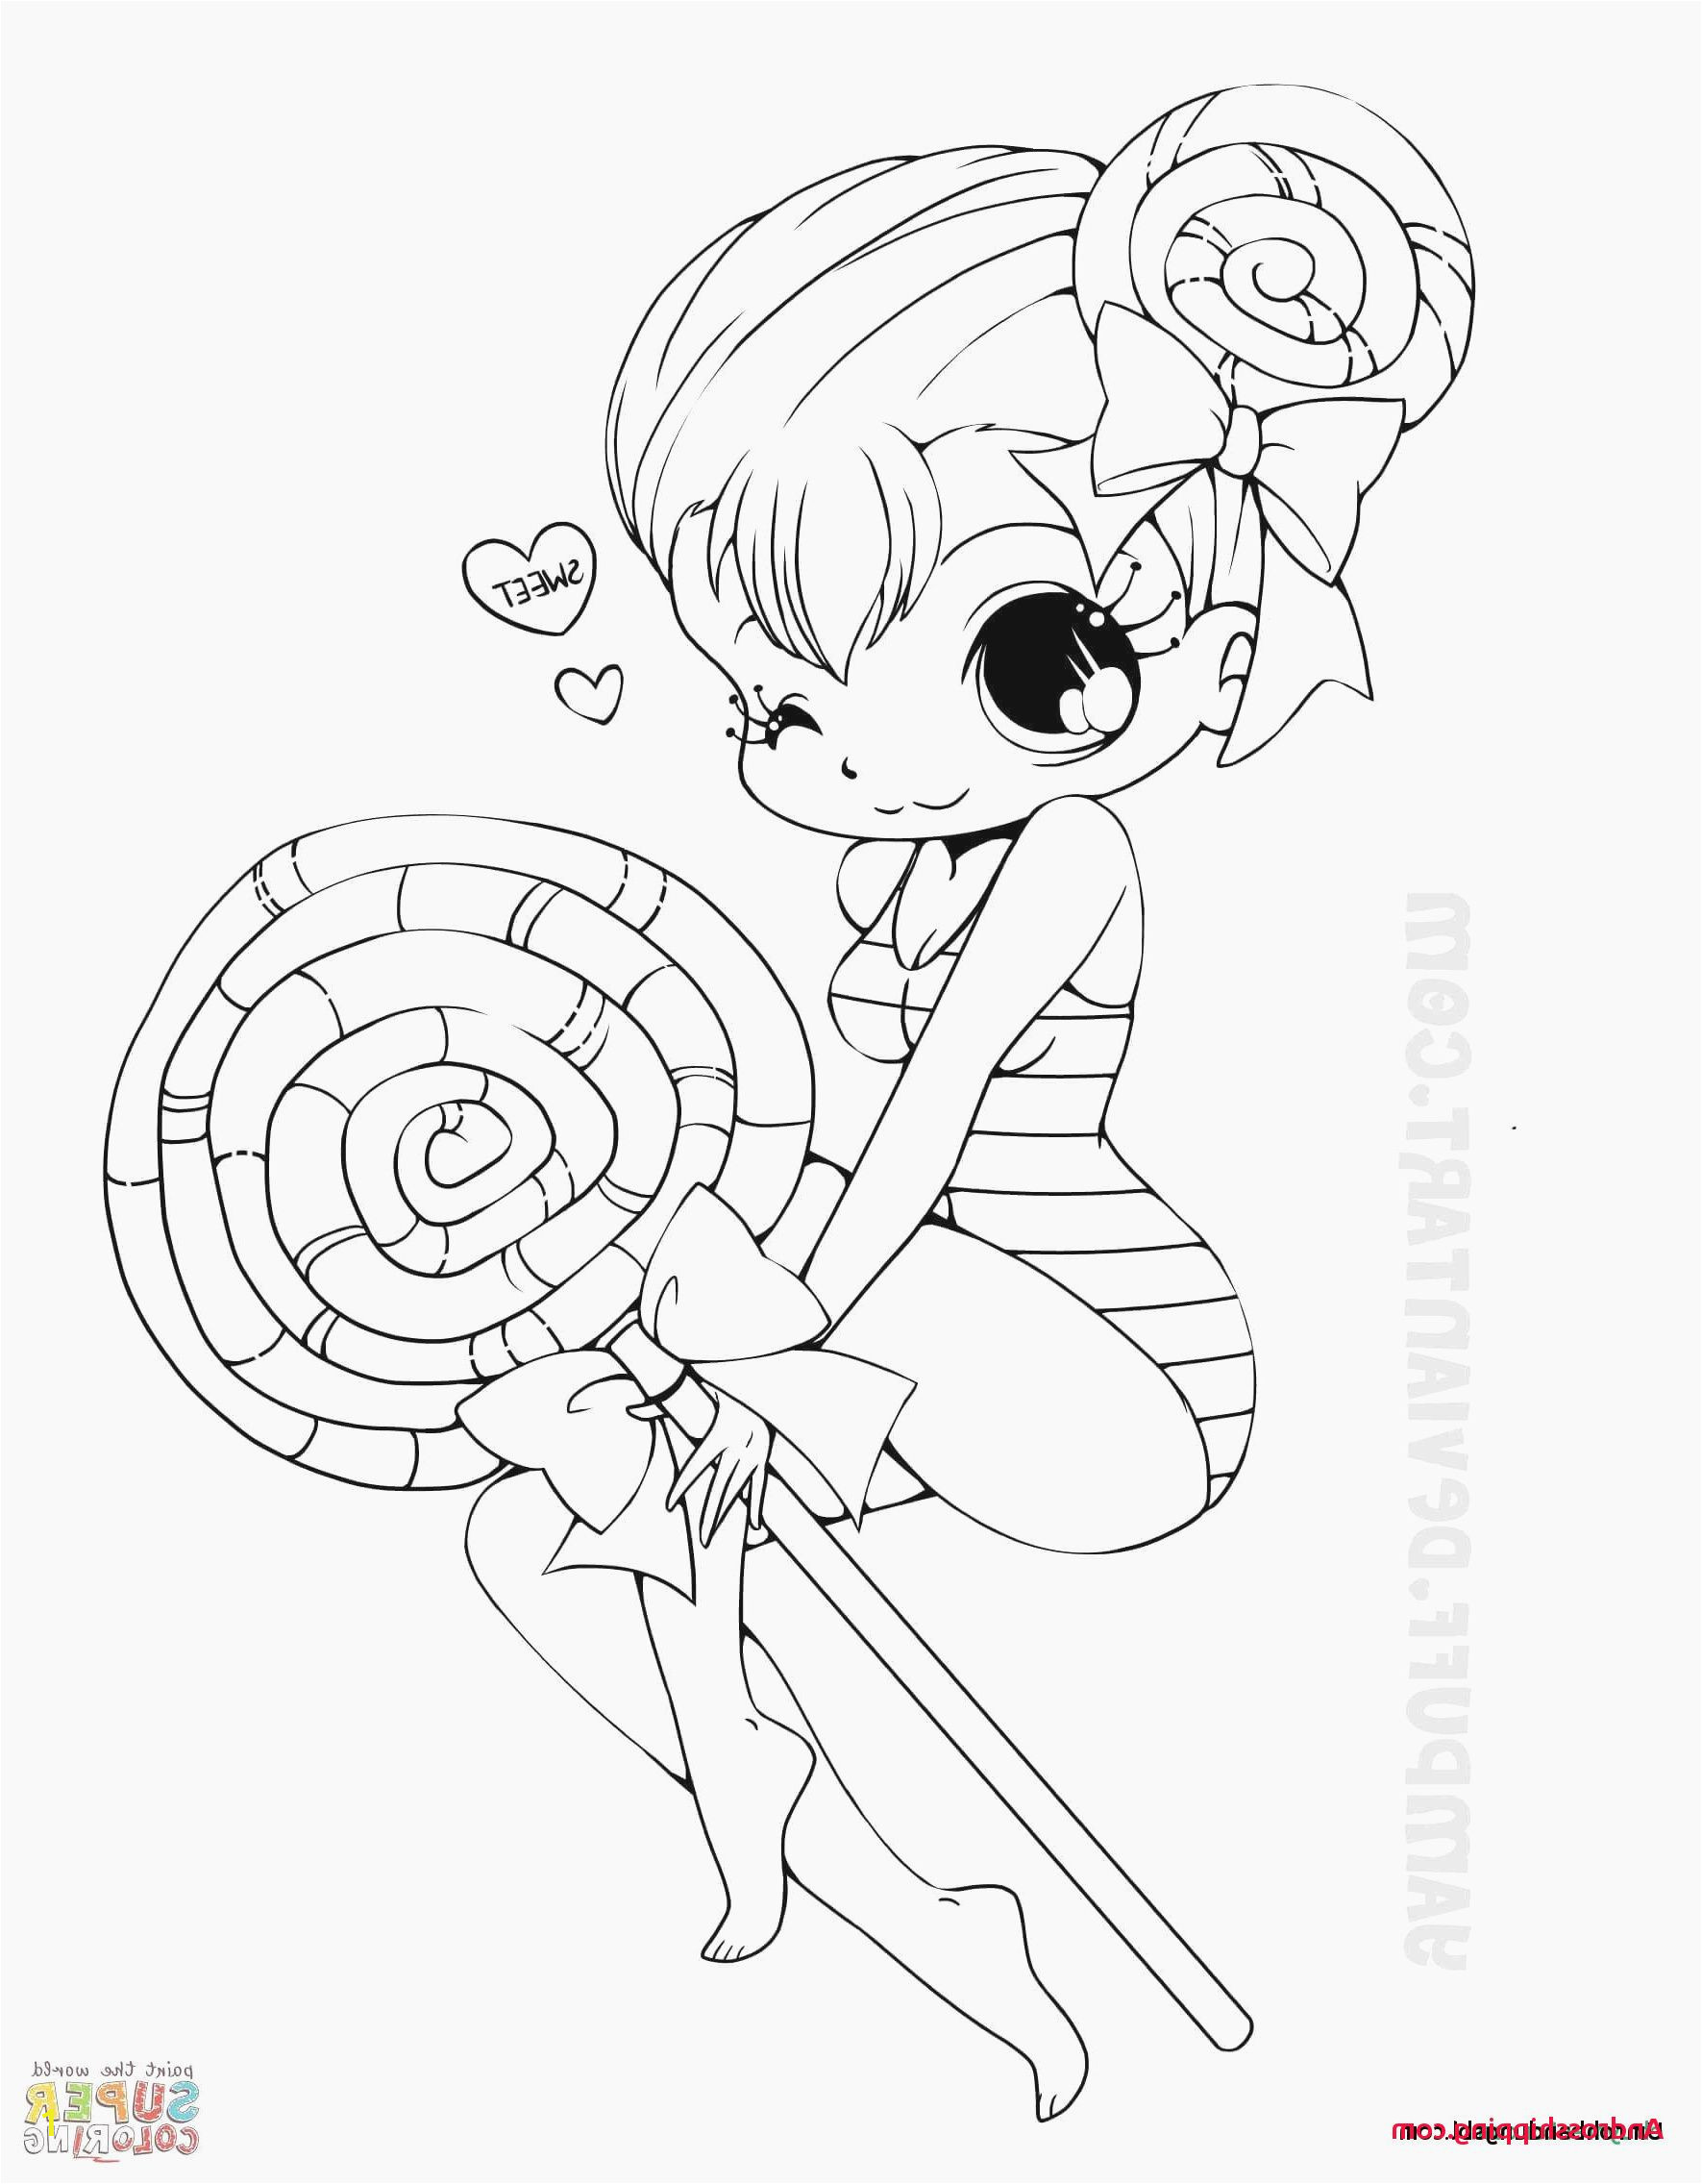 Witch Coloring Pages for Adults Girl Face Coloring Page Witch Coloring Page Inspirational